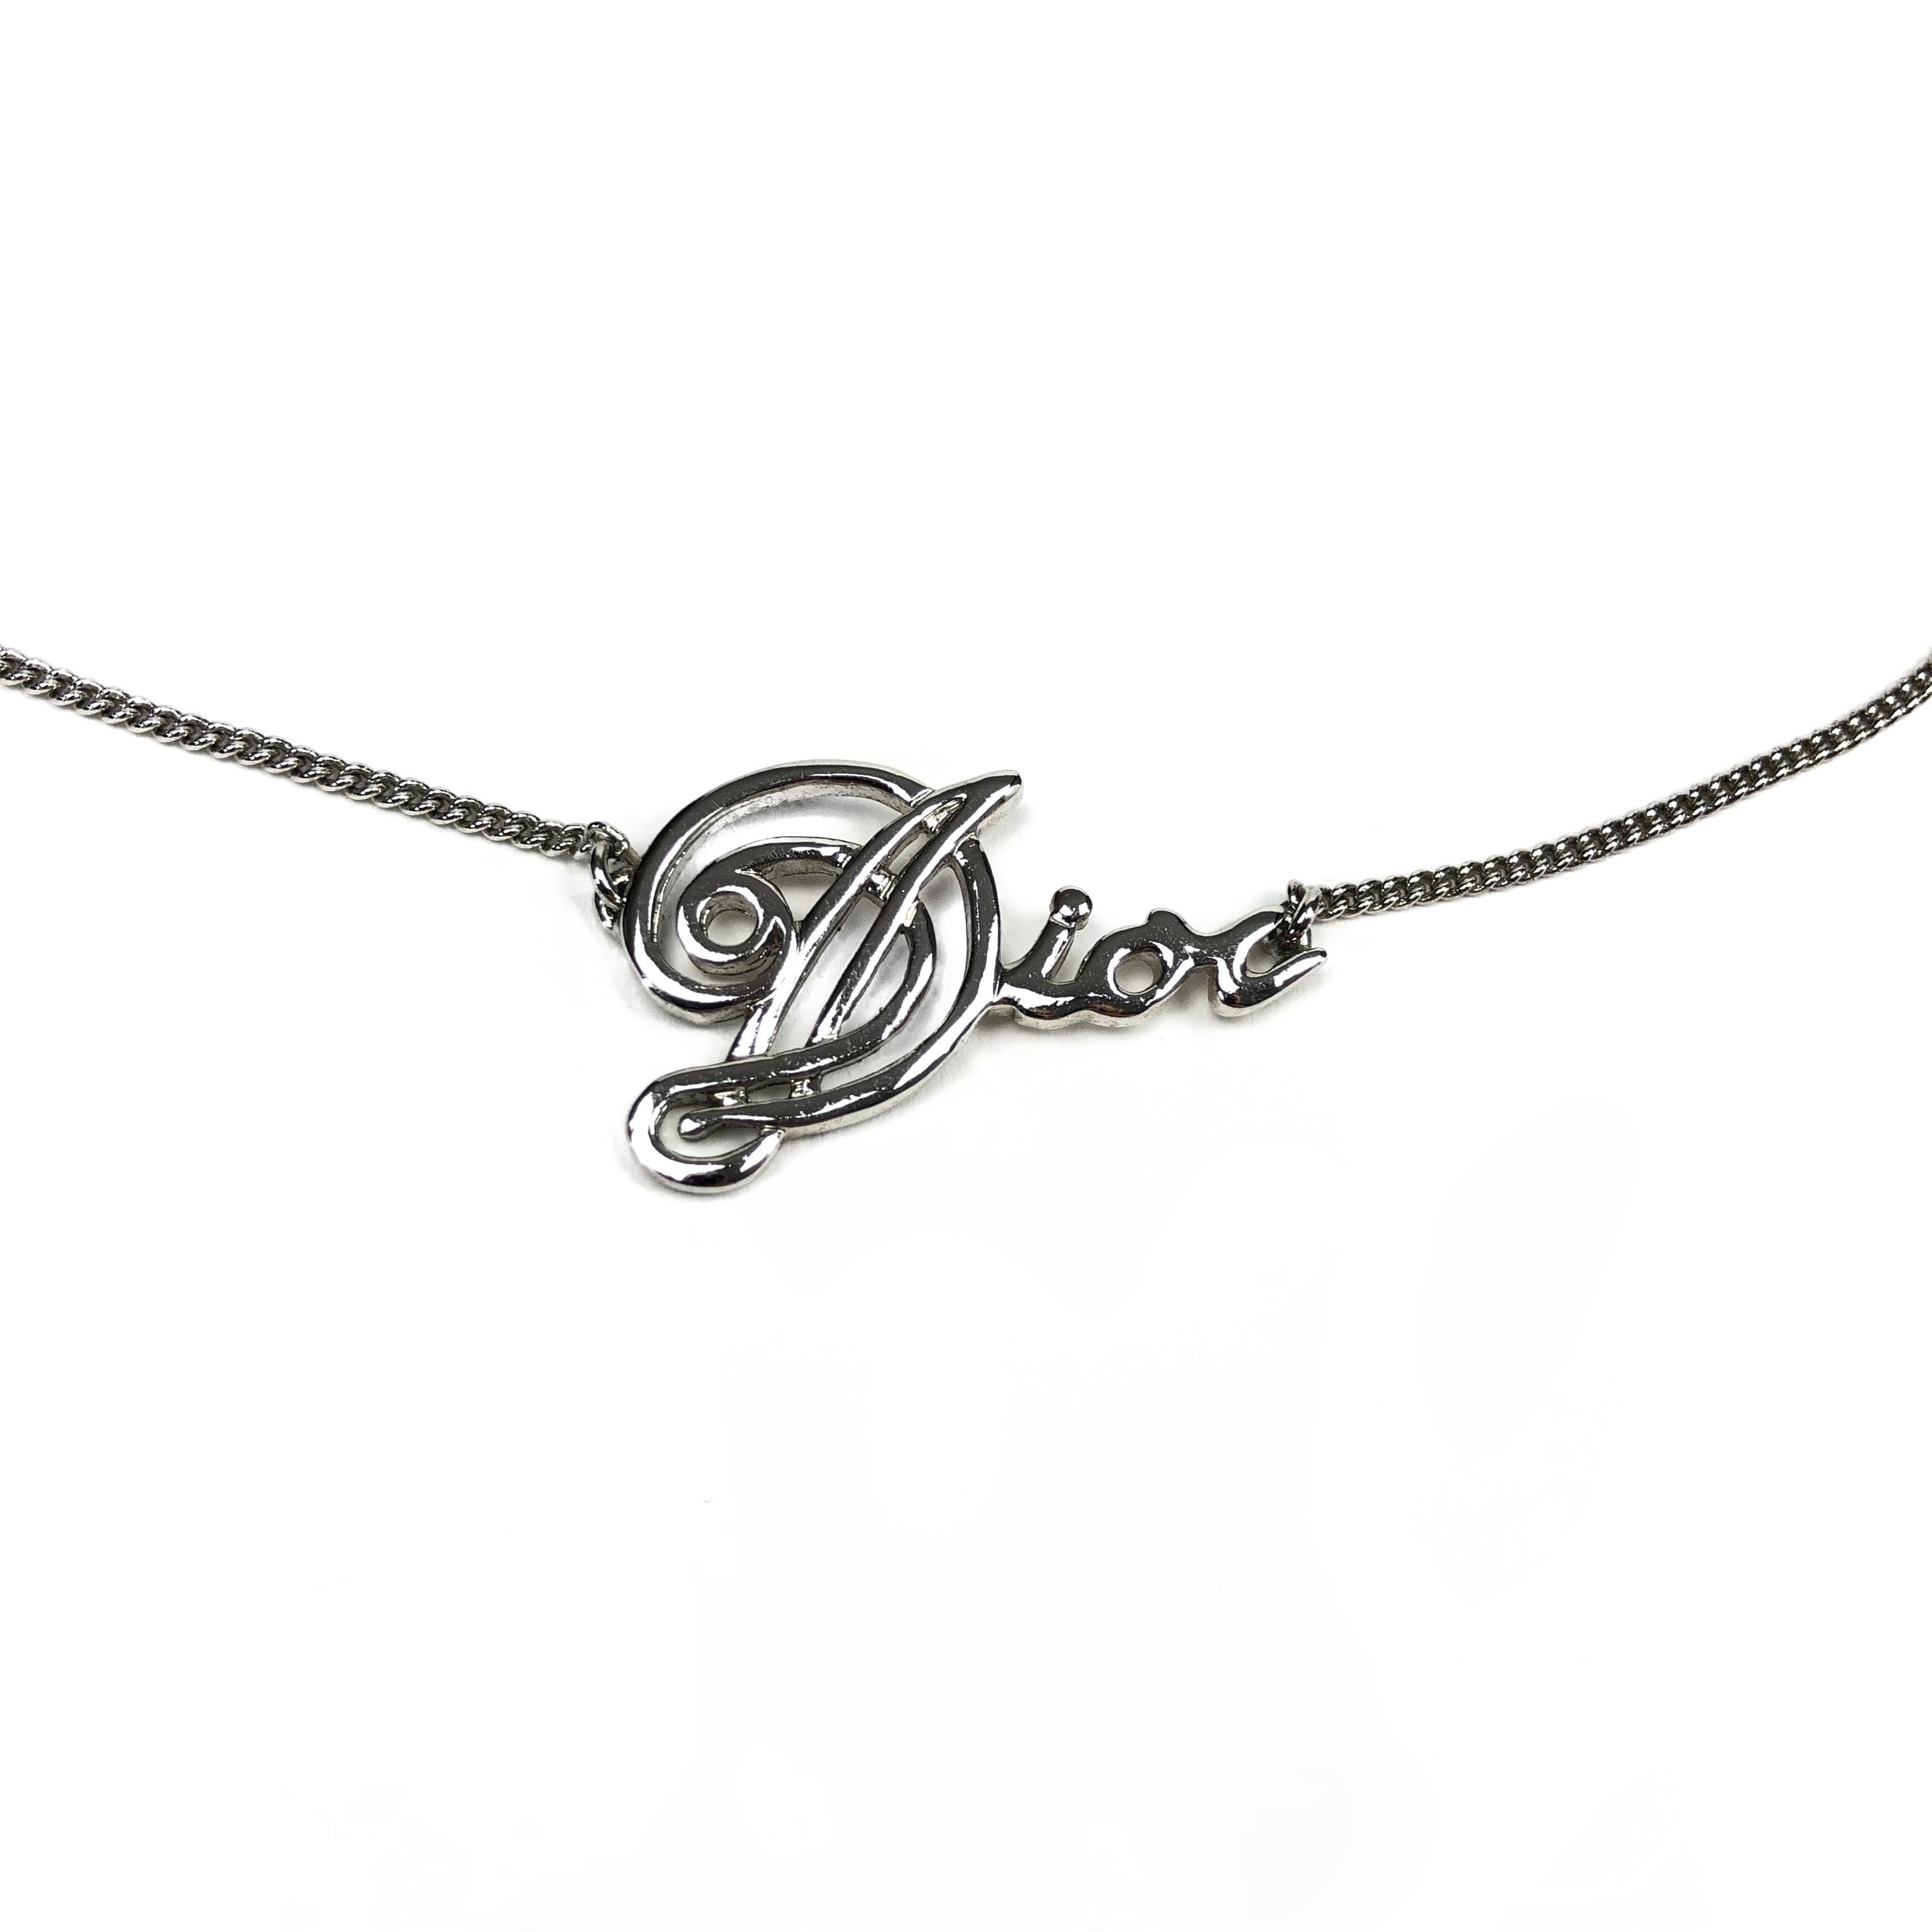 Christian Dior Spell-out Necklace